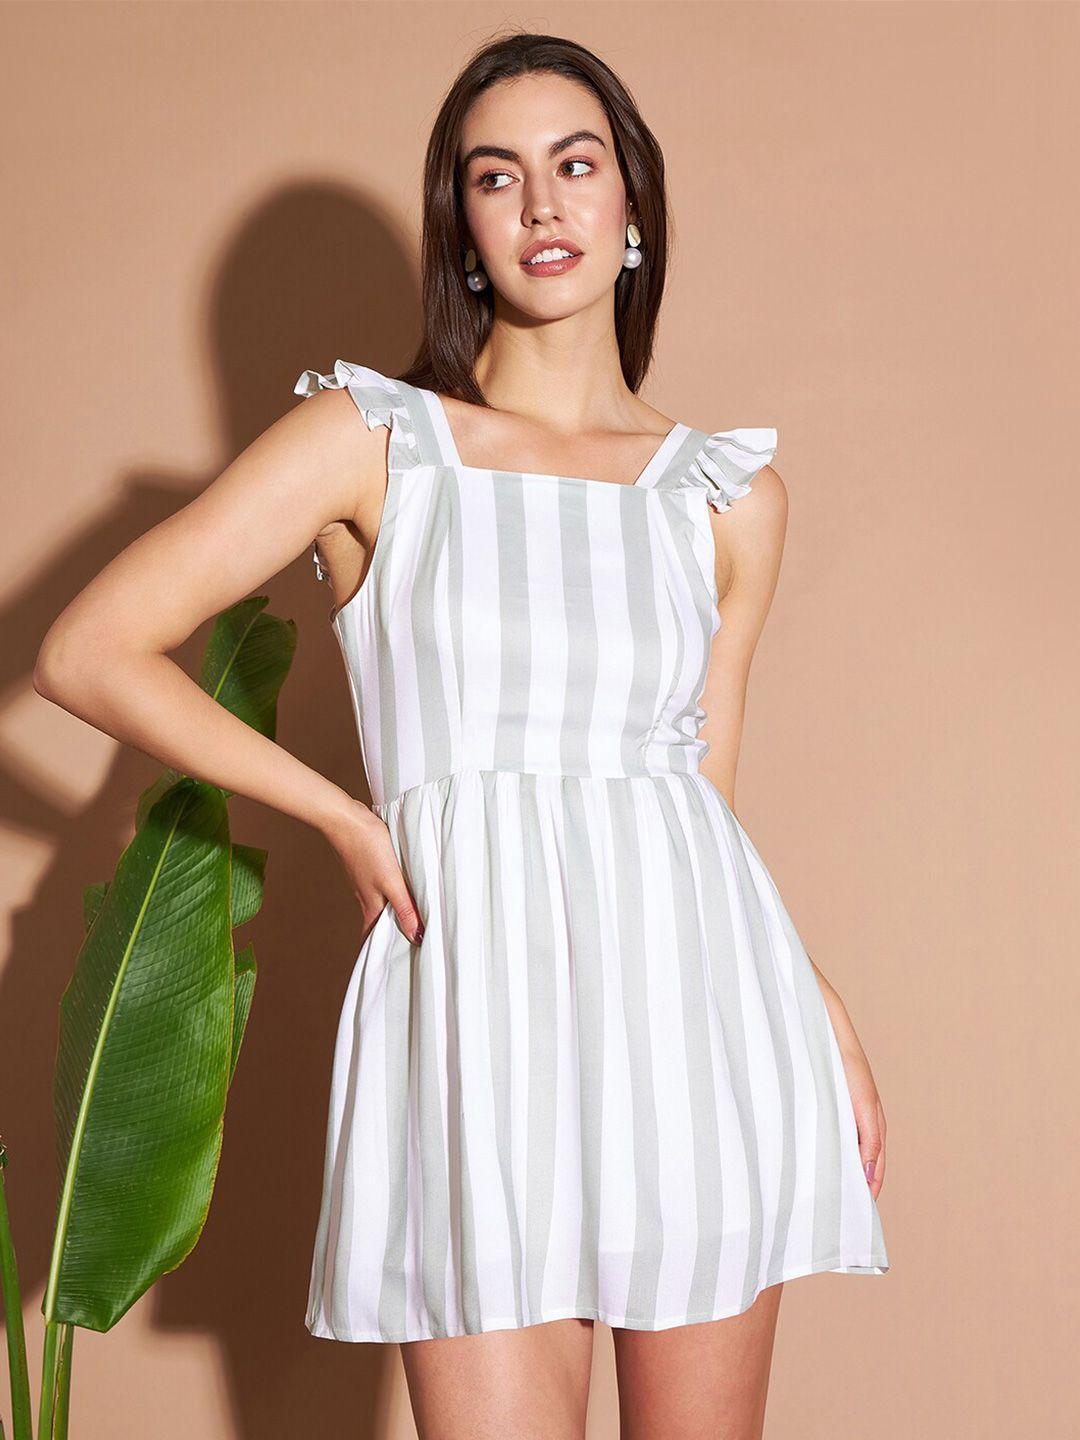 marie-claire-white-striped-fit-&-flare-dress